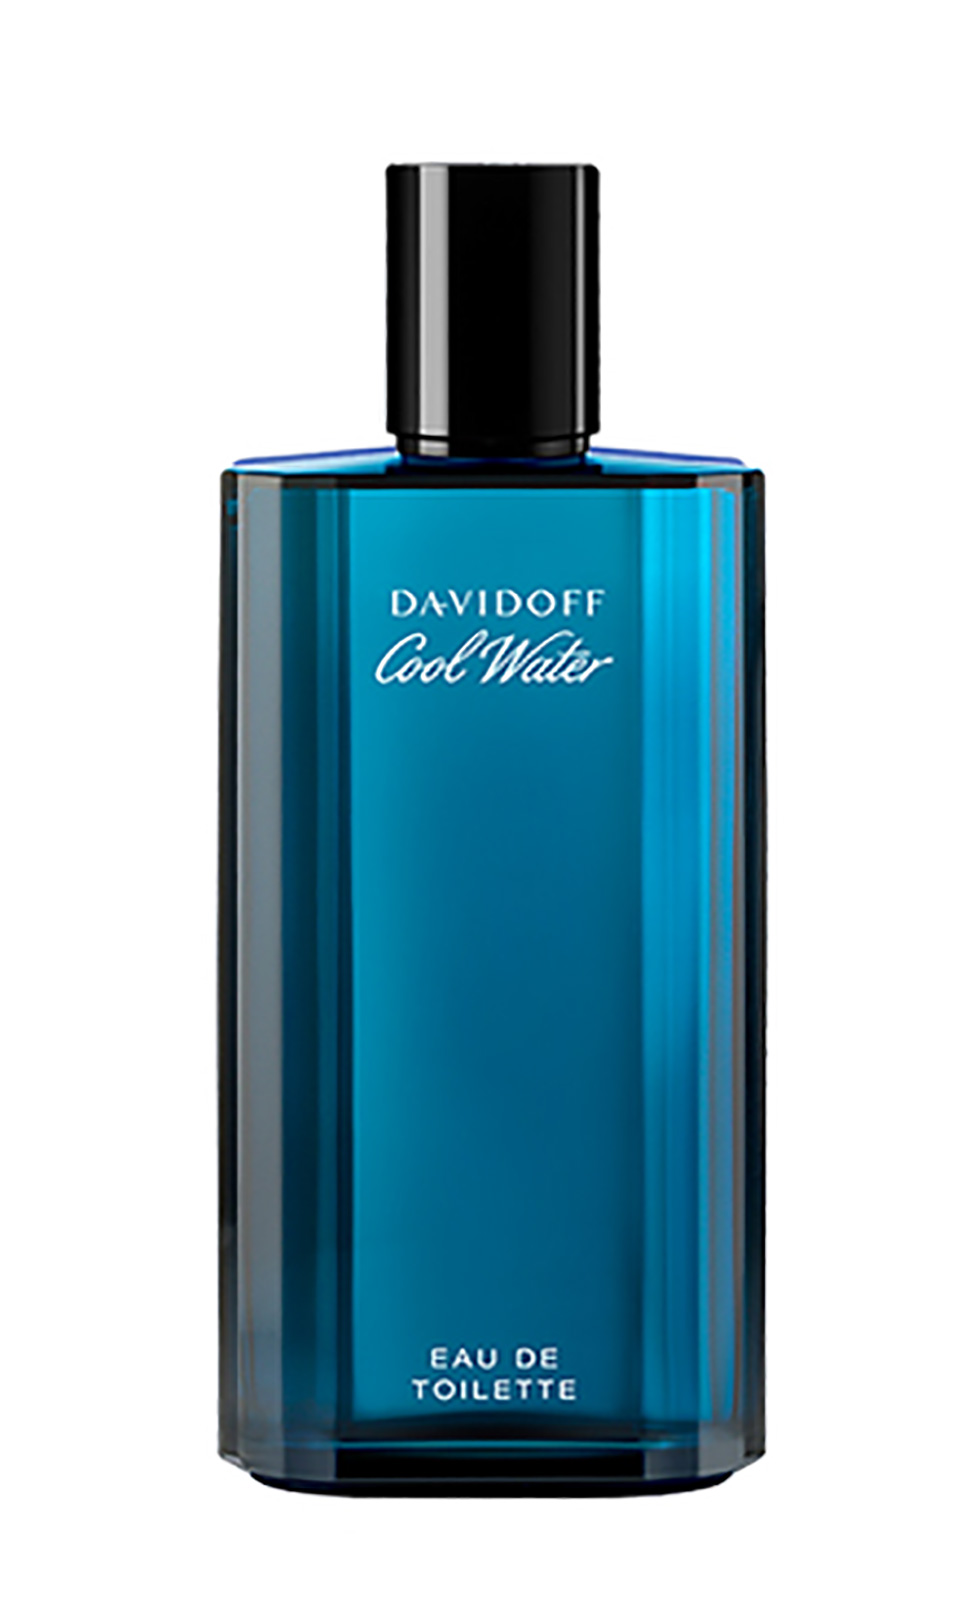 best perfume for him 2019